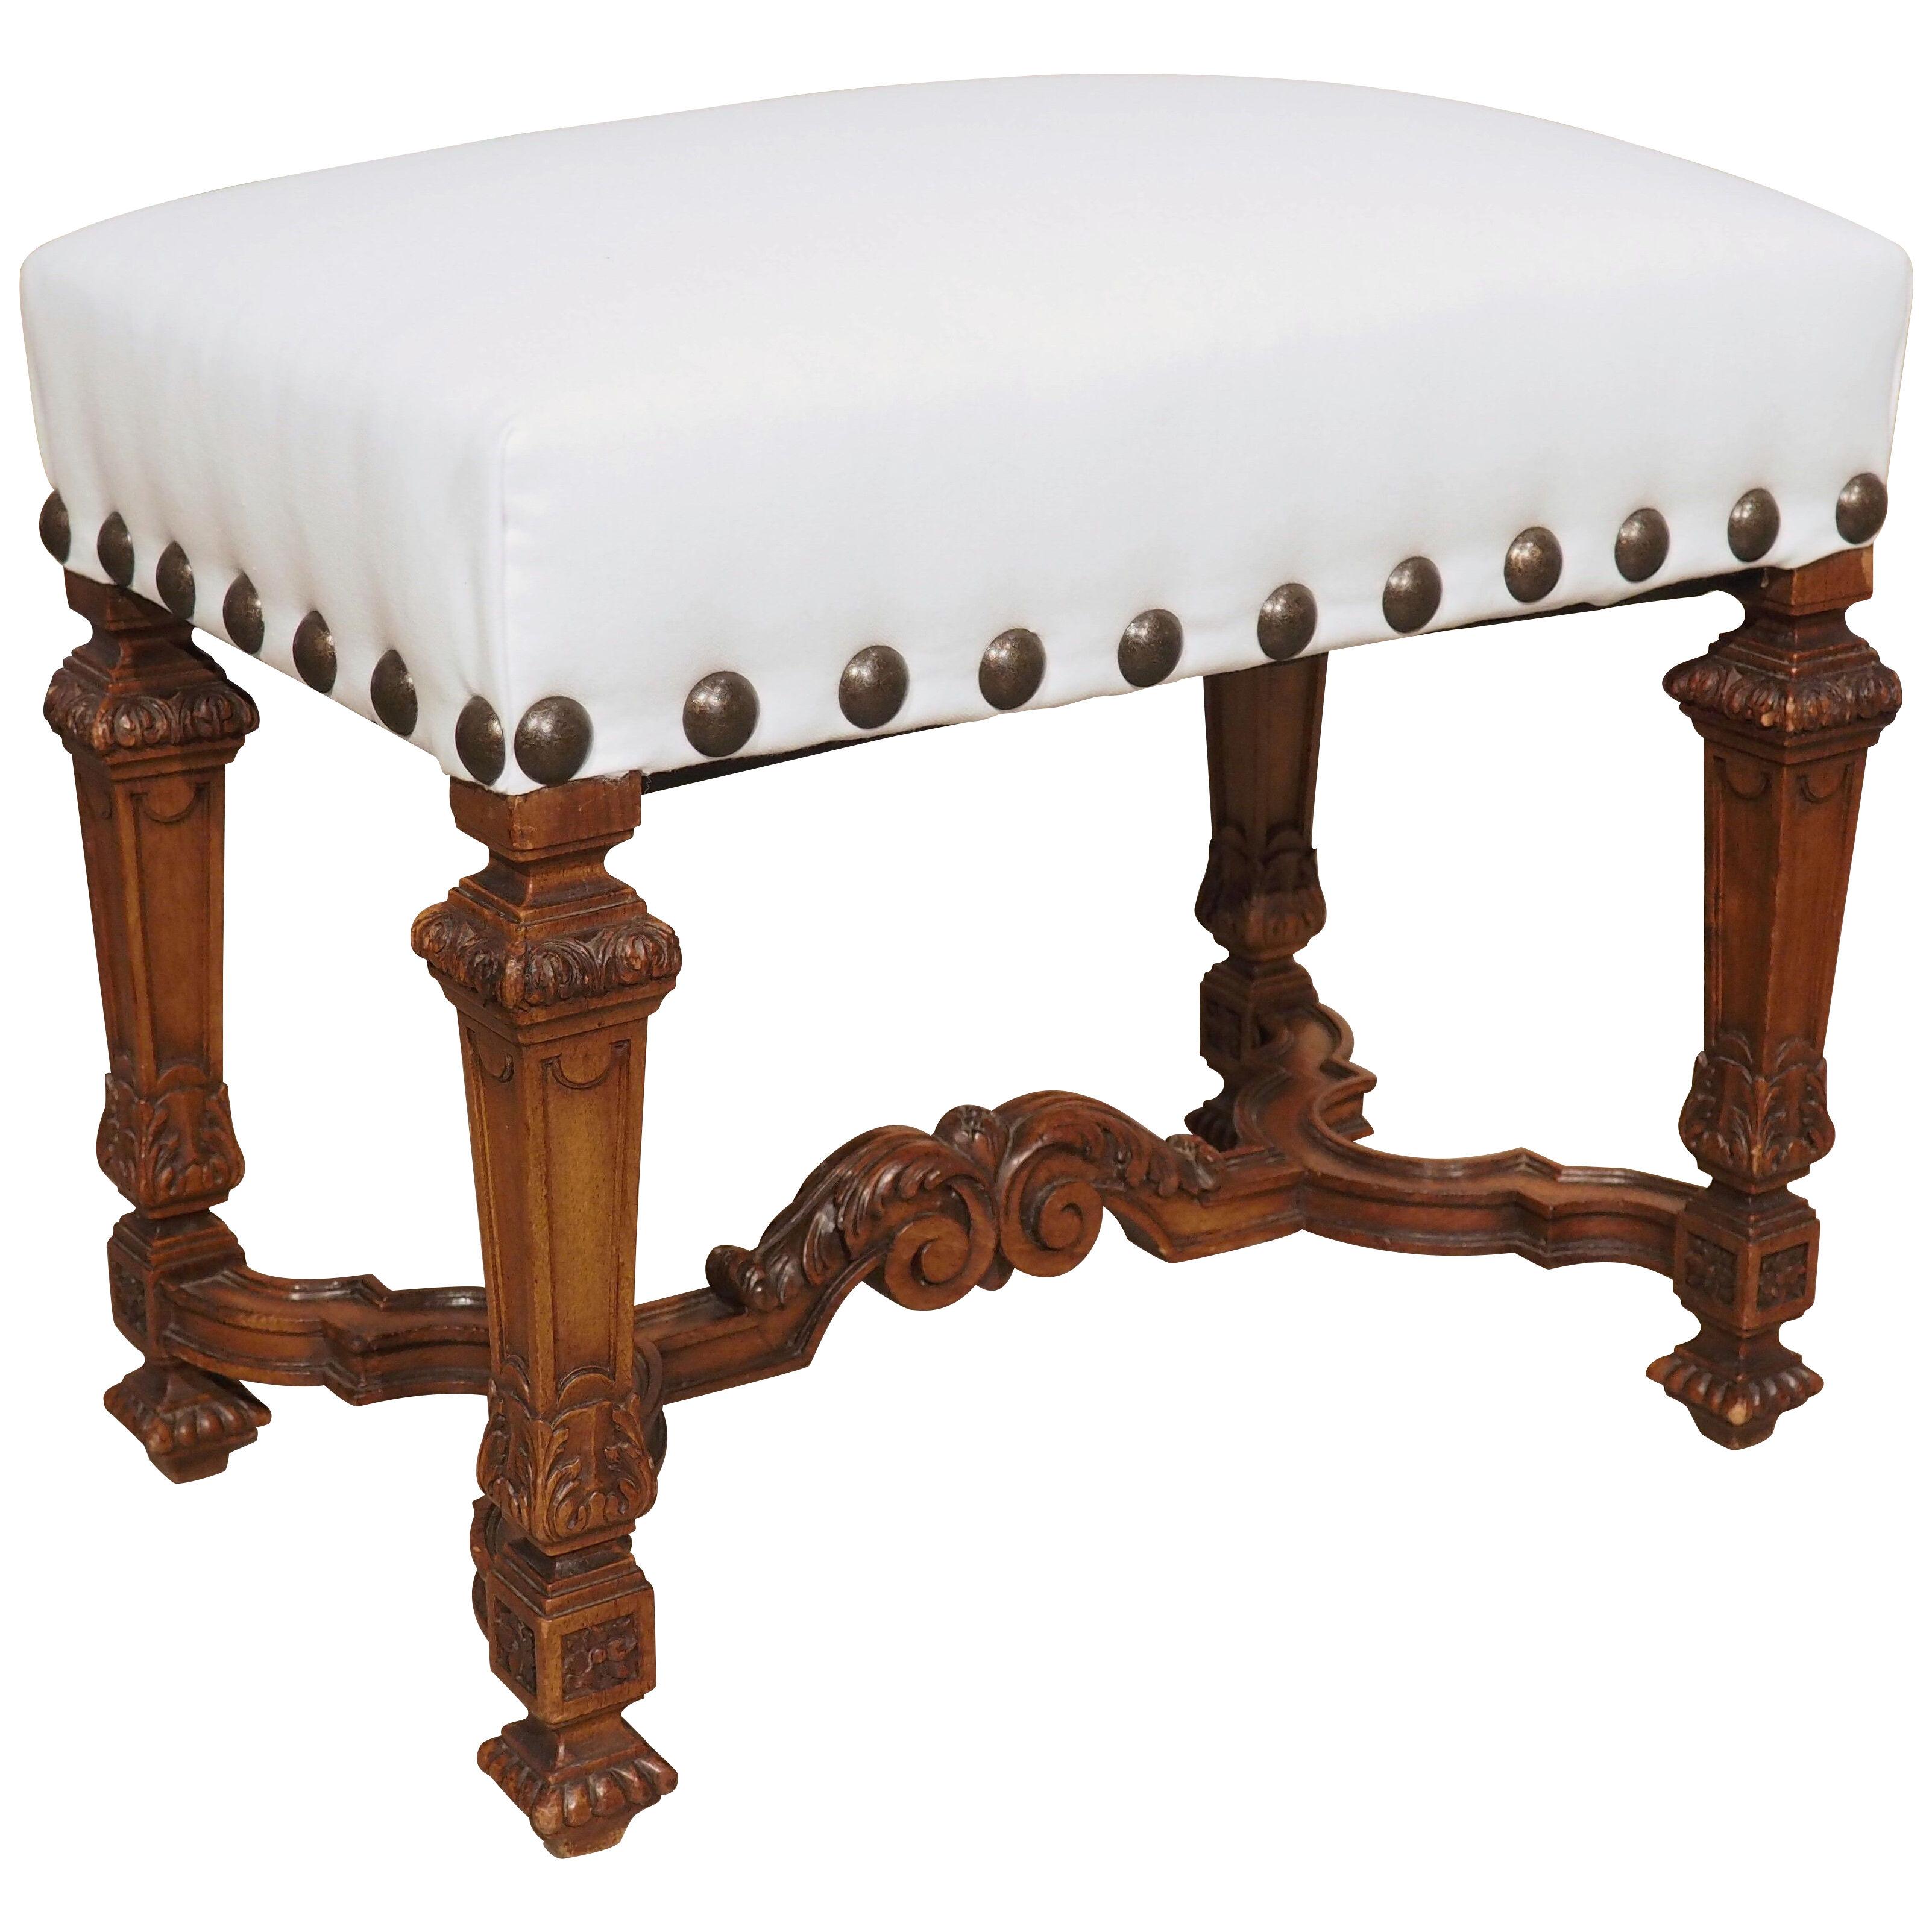 19th Century French Walnut Wood Louis XIV Style Tabouret